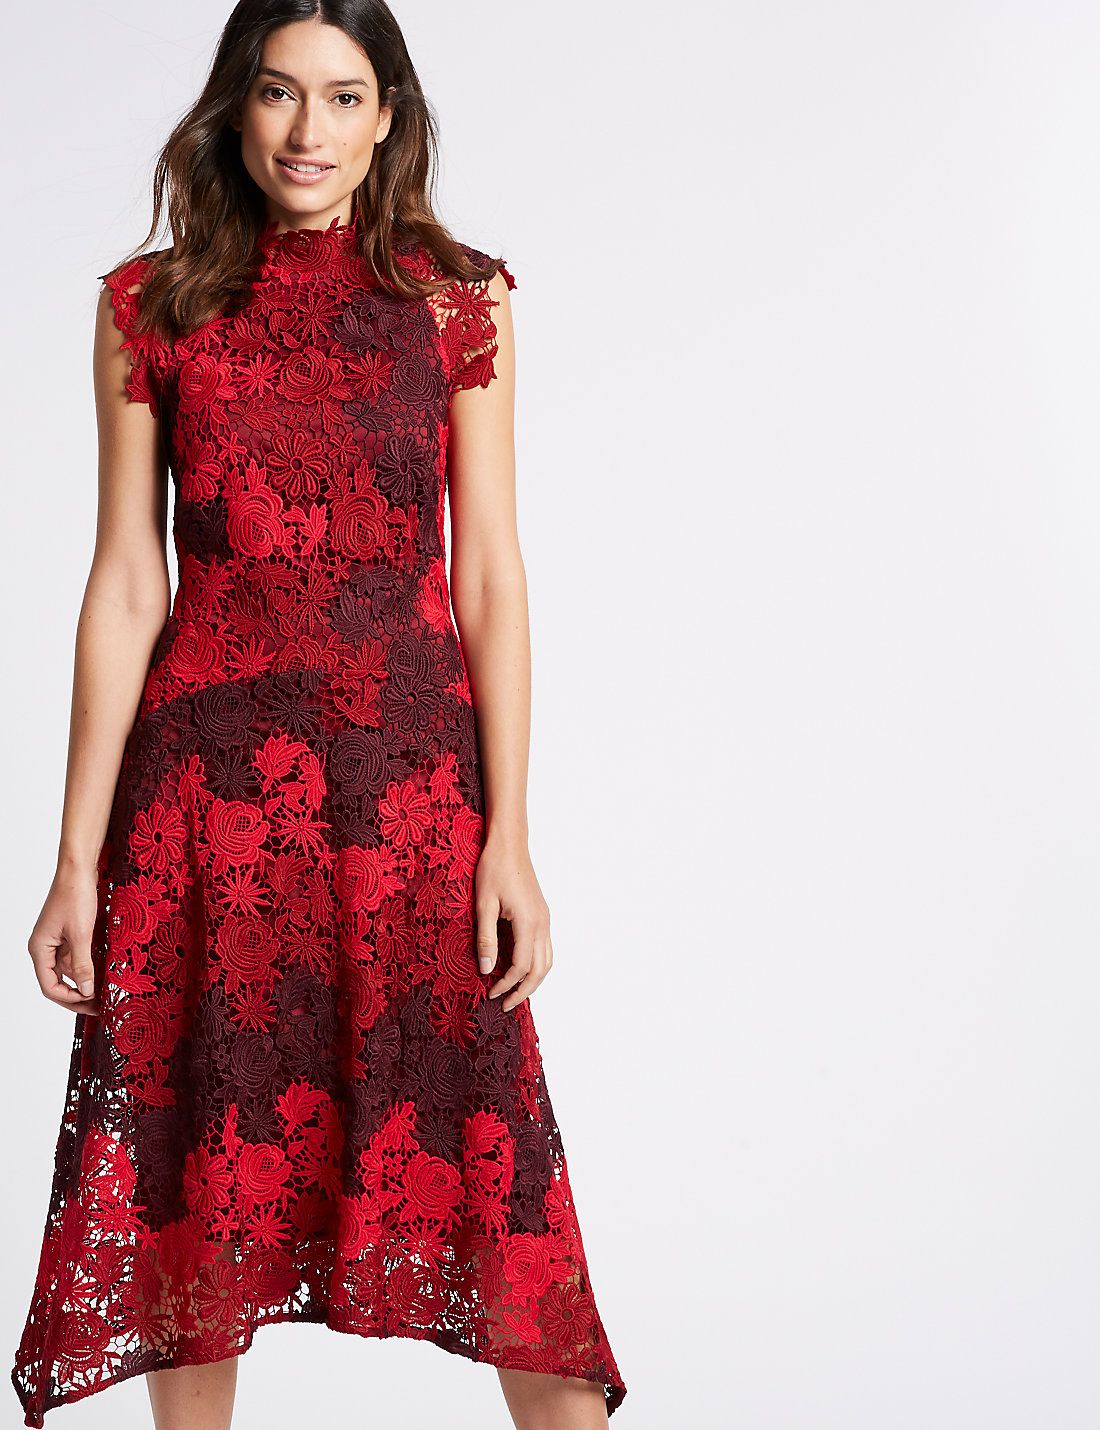 m&s red lace dress